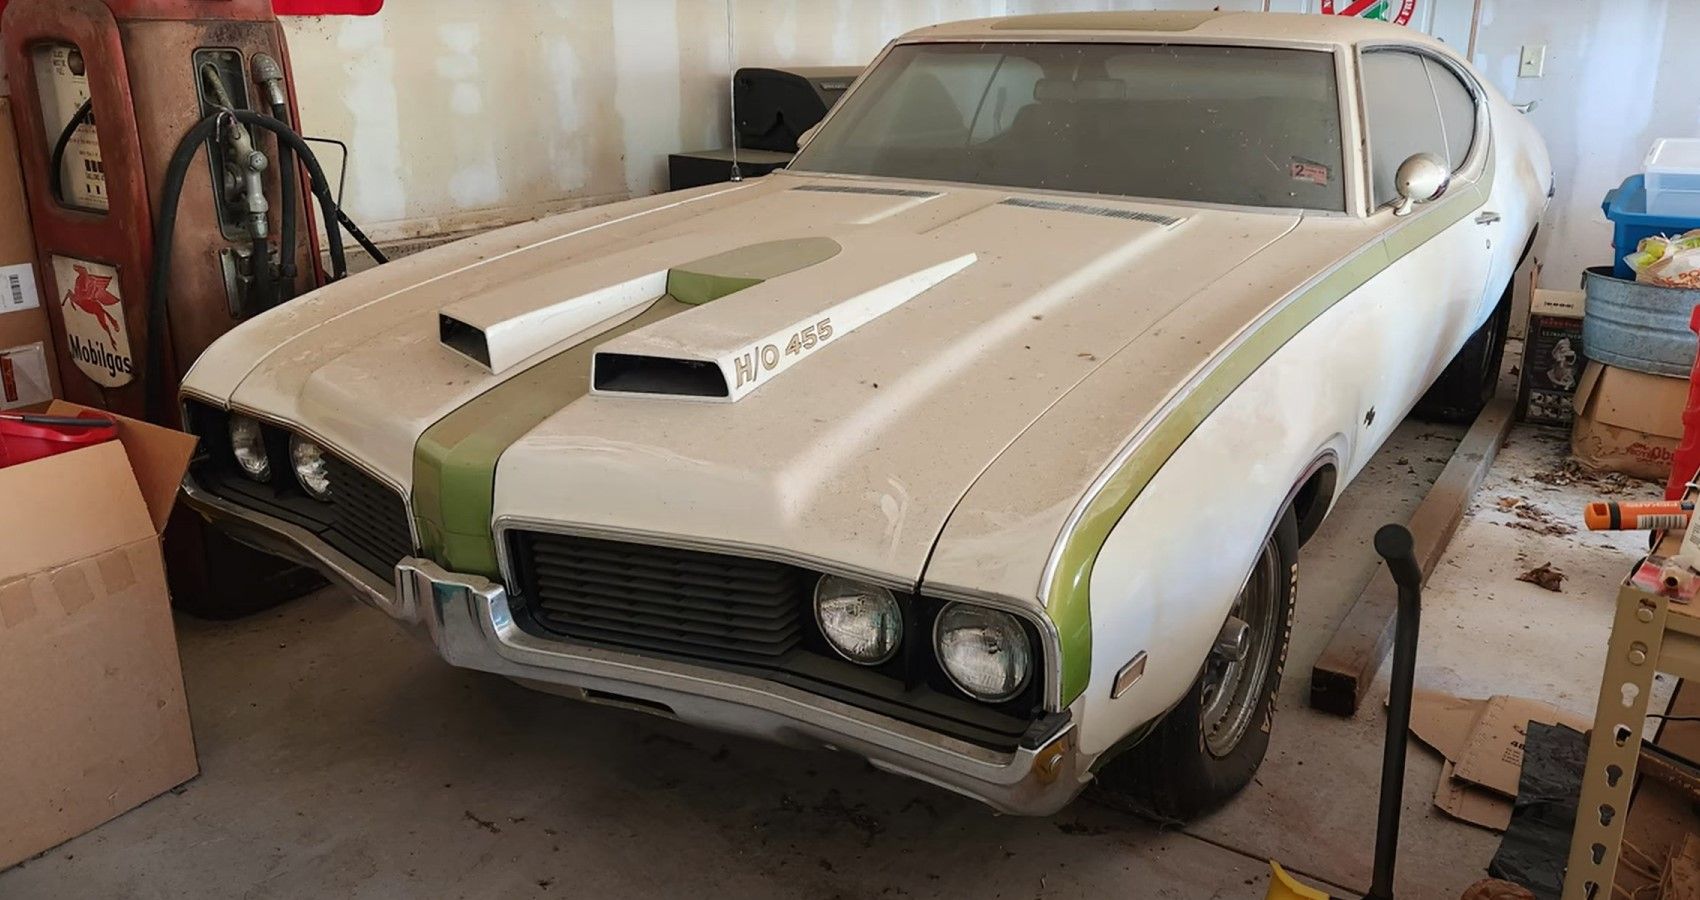 Barn Find Expert Unexpectedly Uncovers A Dodge Superbee And An Oldsmobile Hurst/Olds